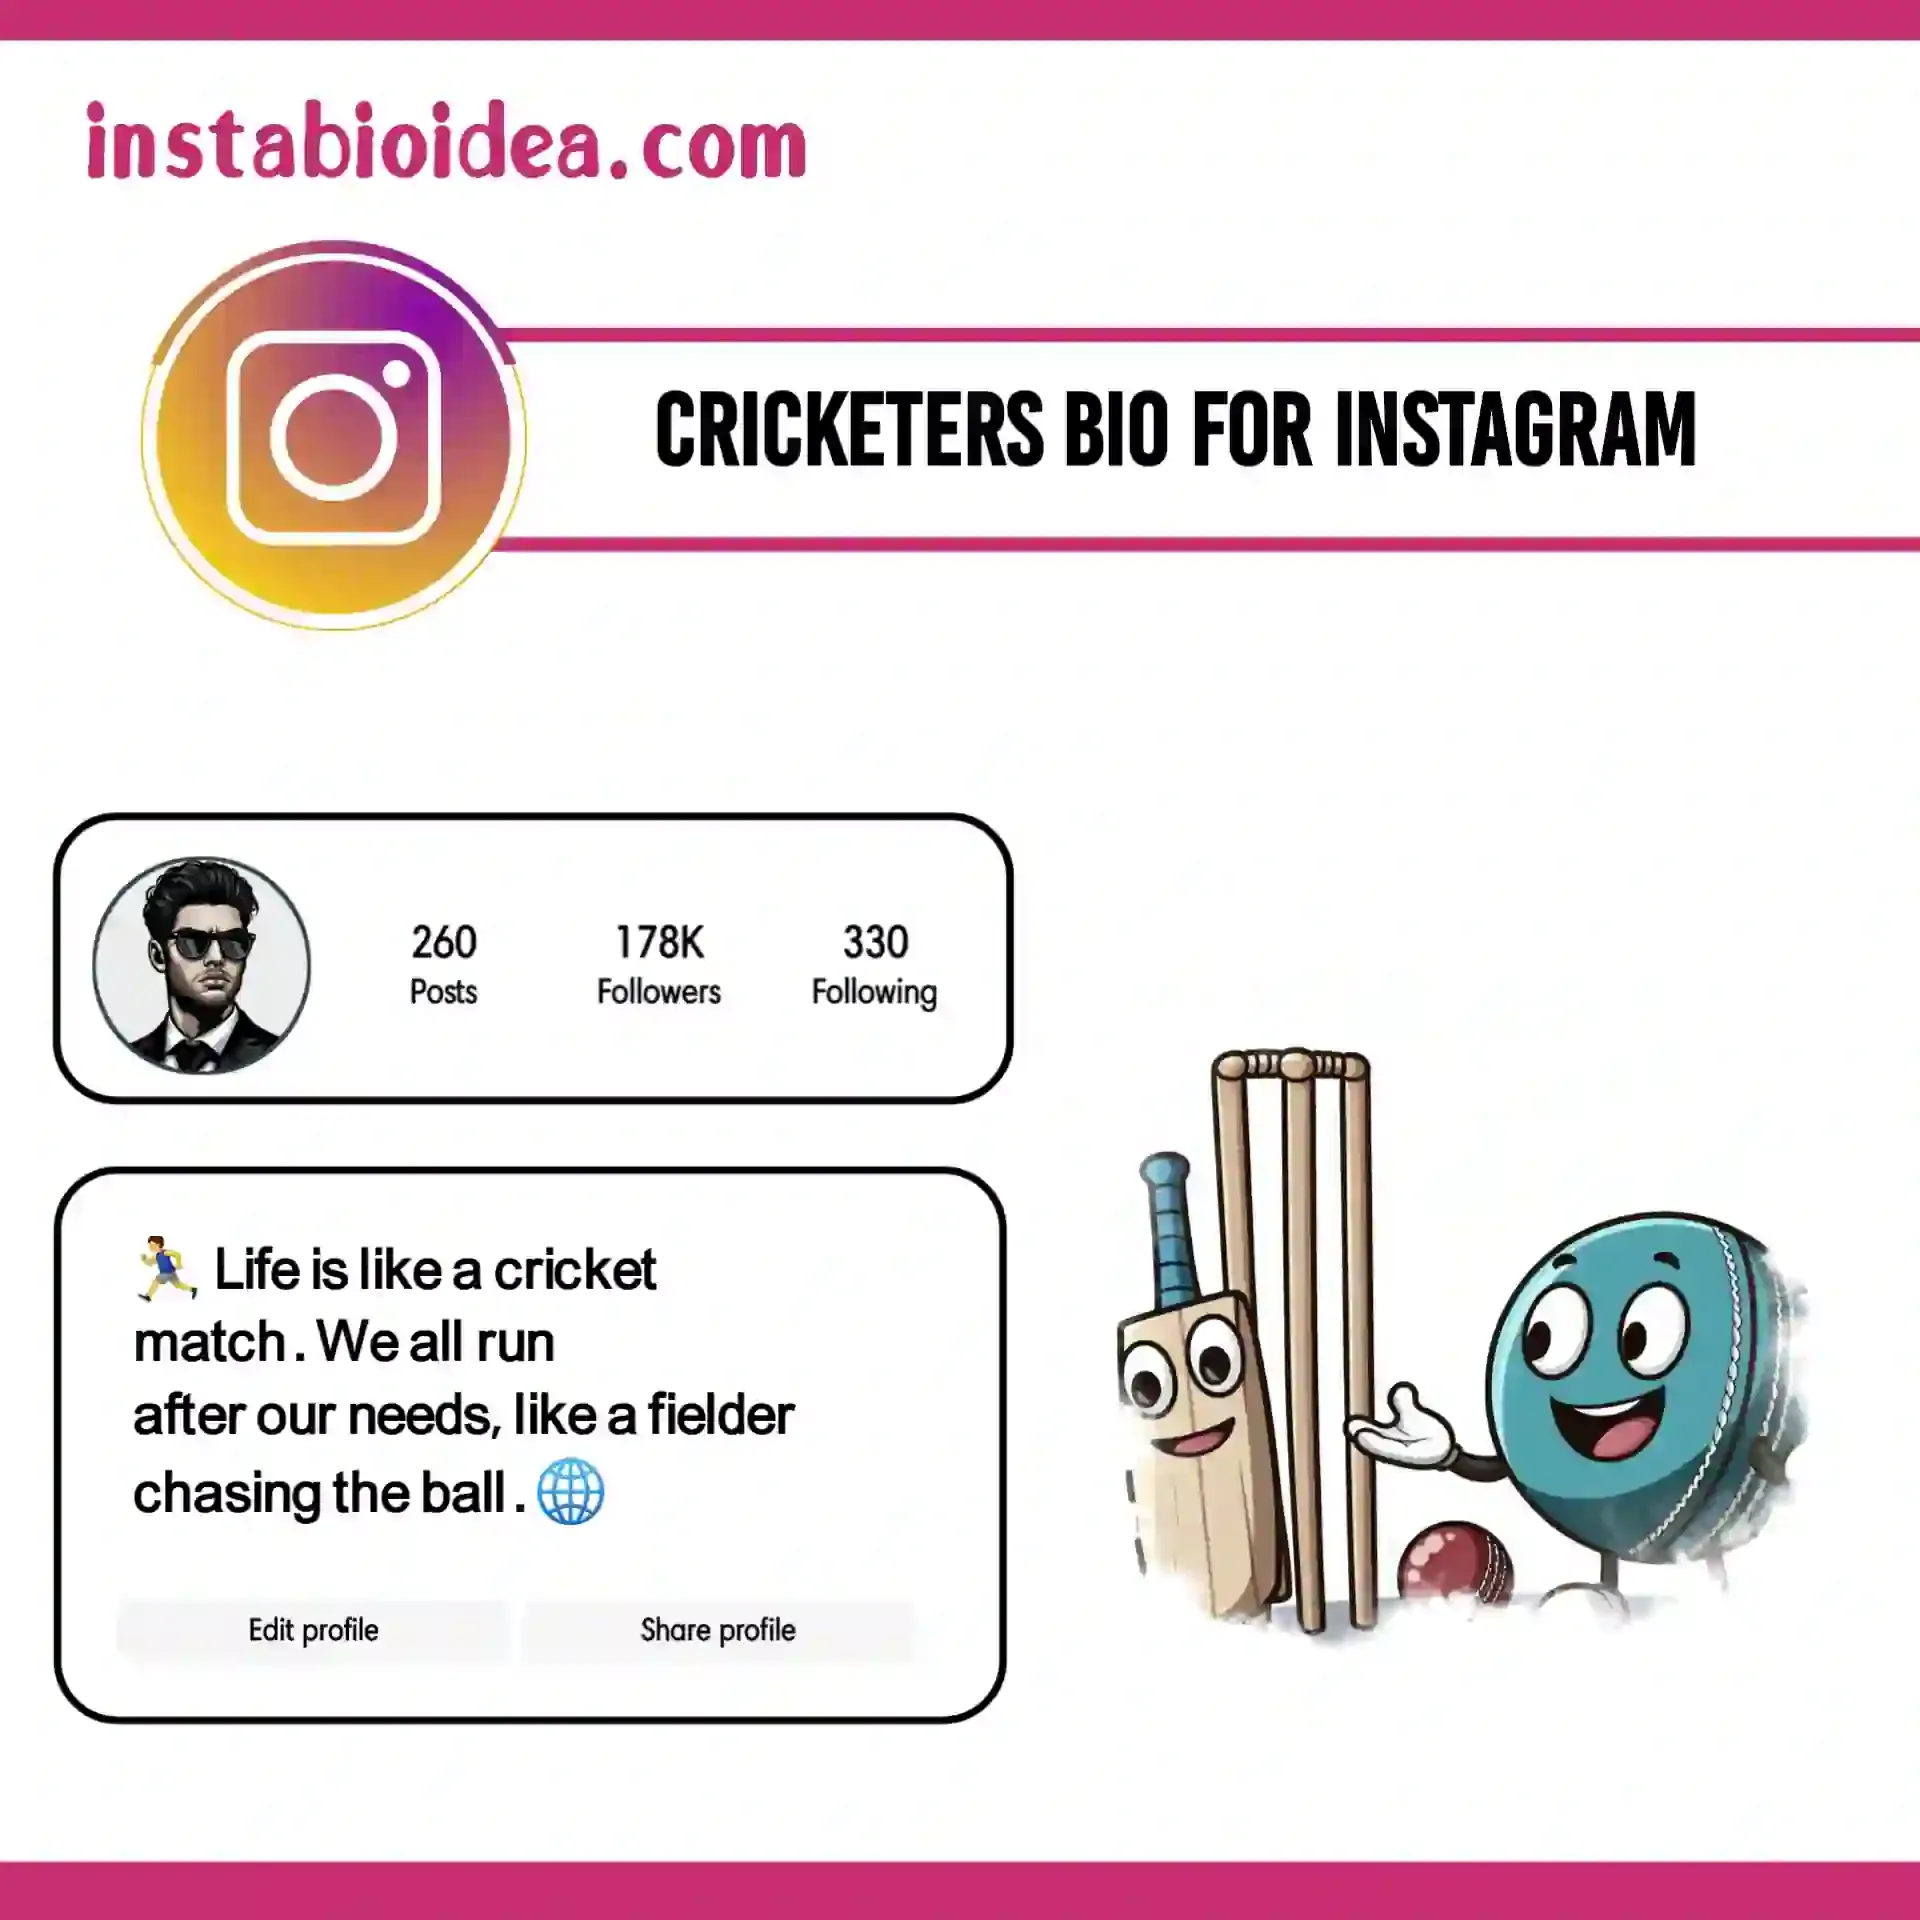 cricketers bio for instagram image